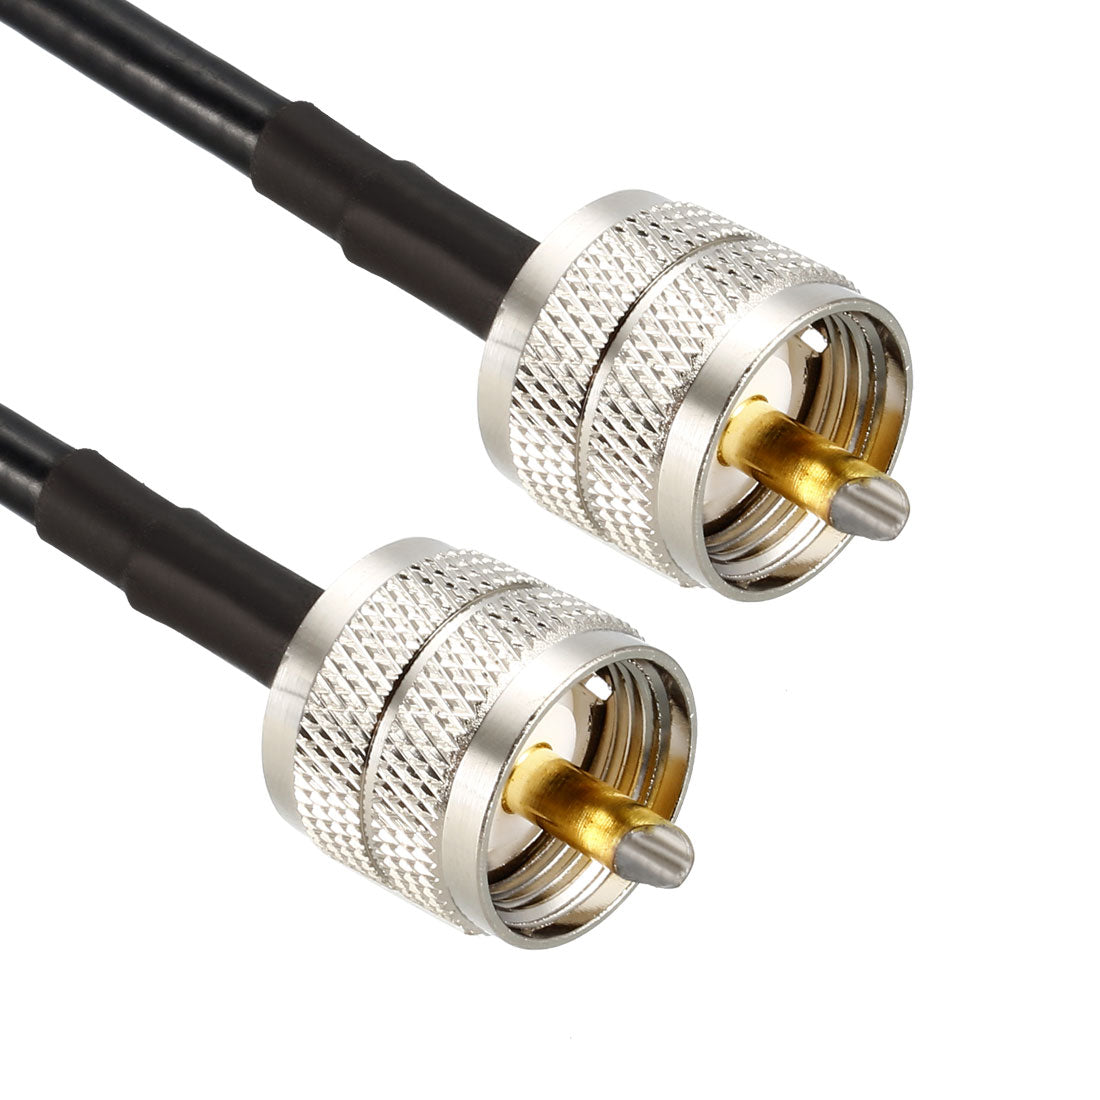 uxcell Uxcell RG58 RF Coax Cable UHF () Male to UHF () Male Antenna Cable 3 Ft 2pcs